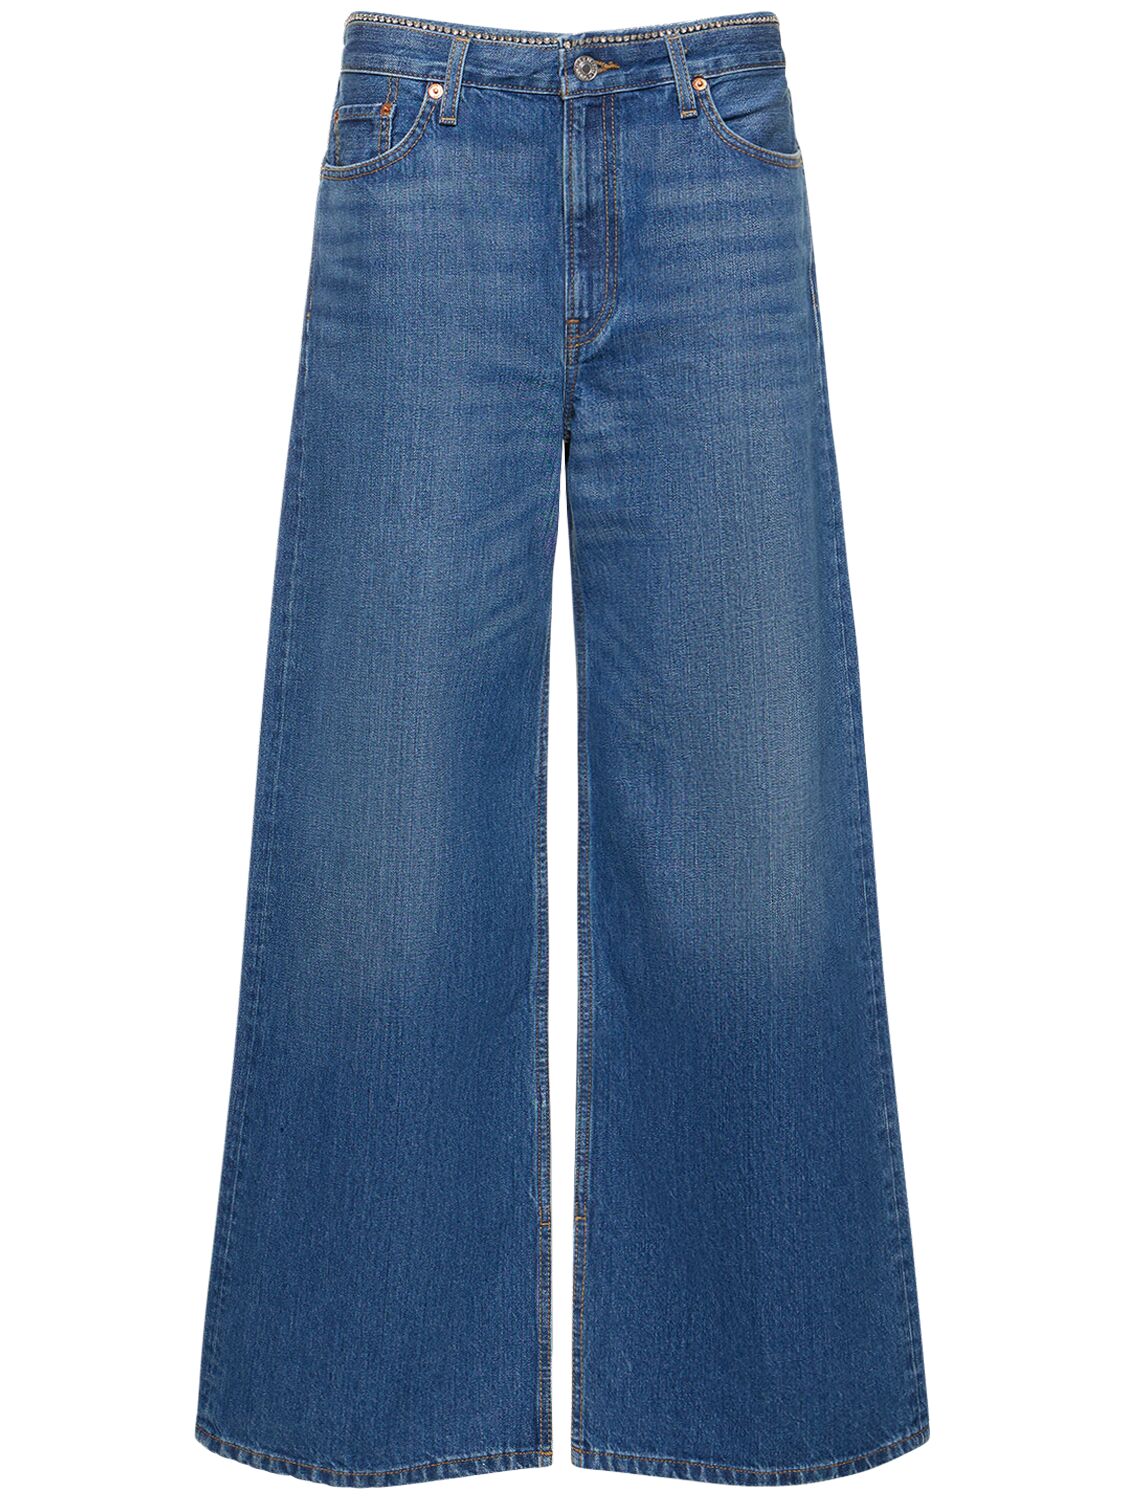 Image of Low Rider Loose Cotton Jeans